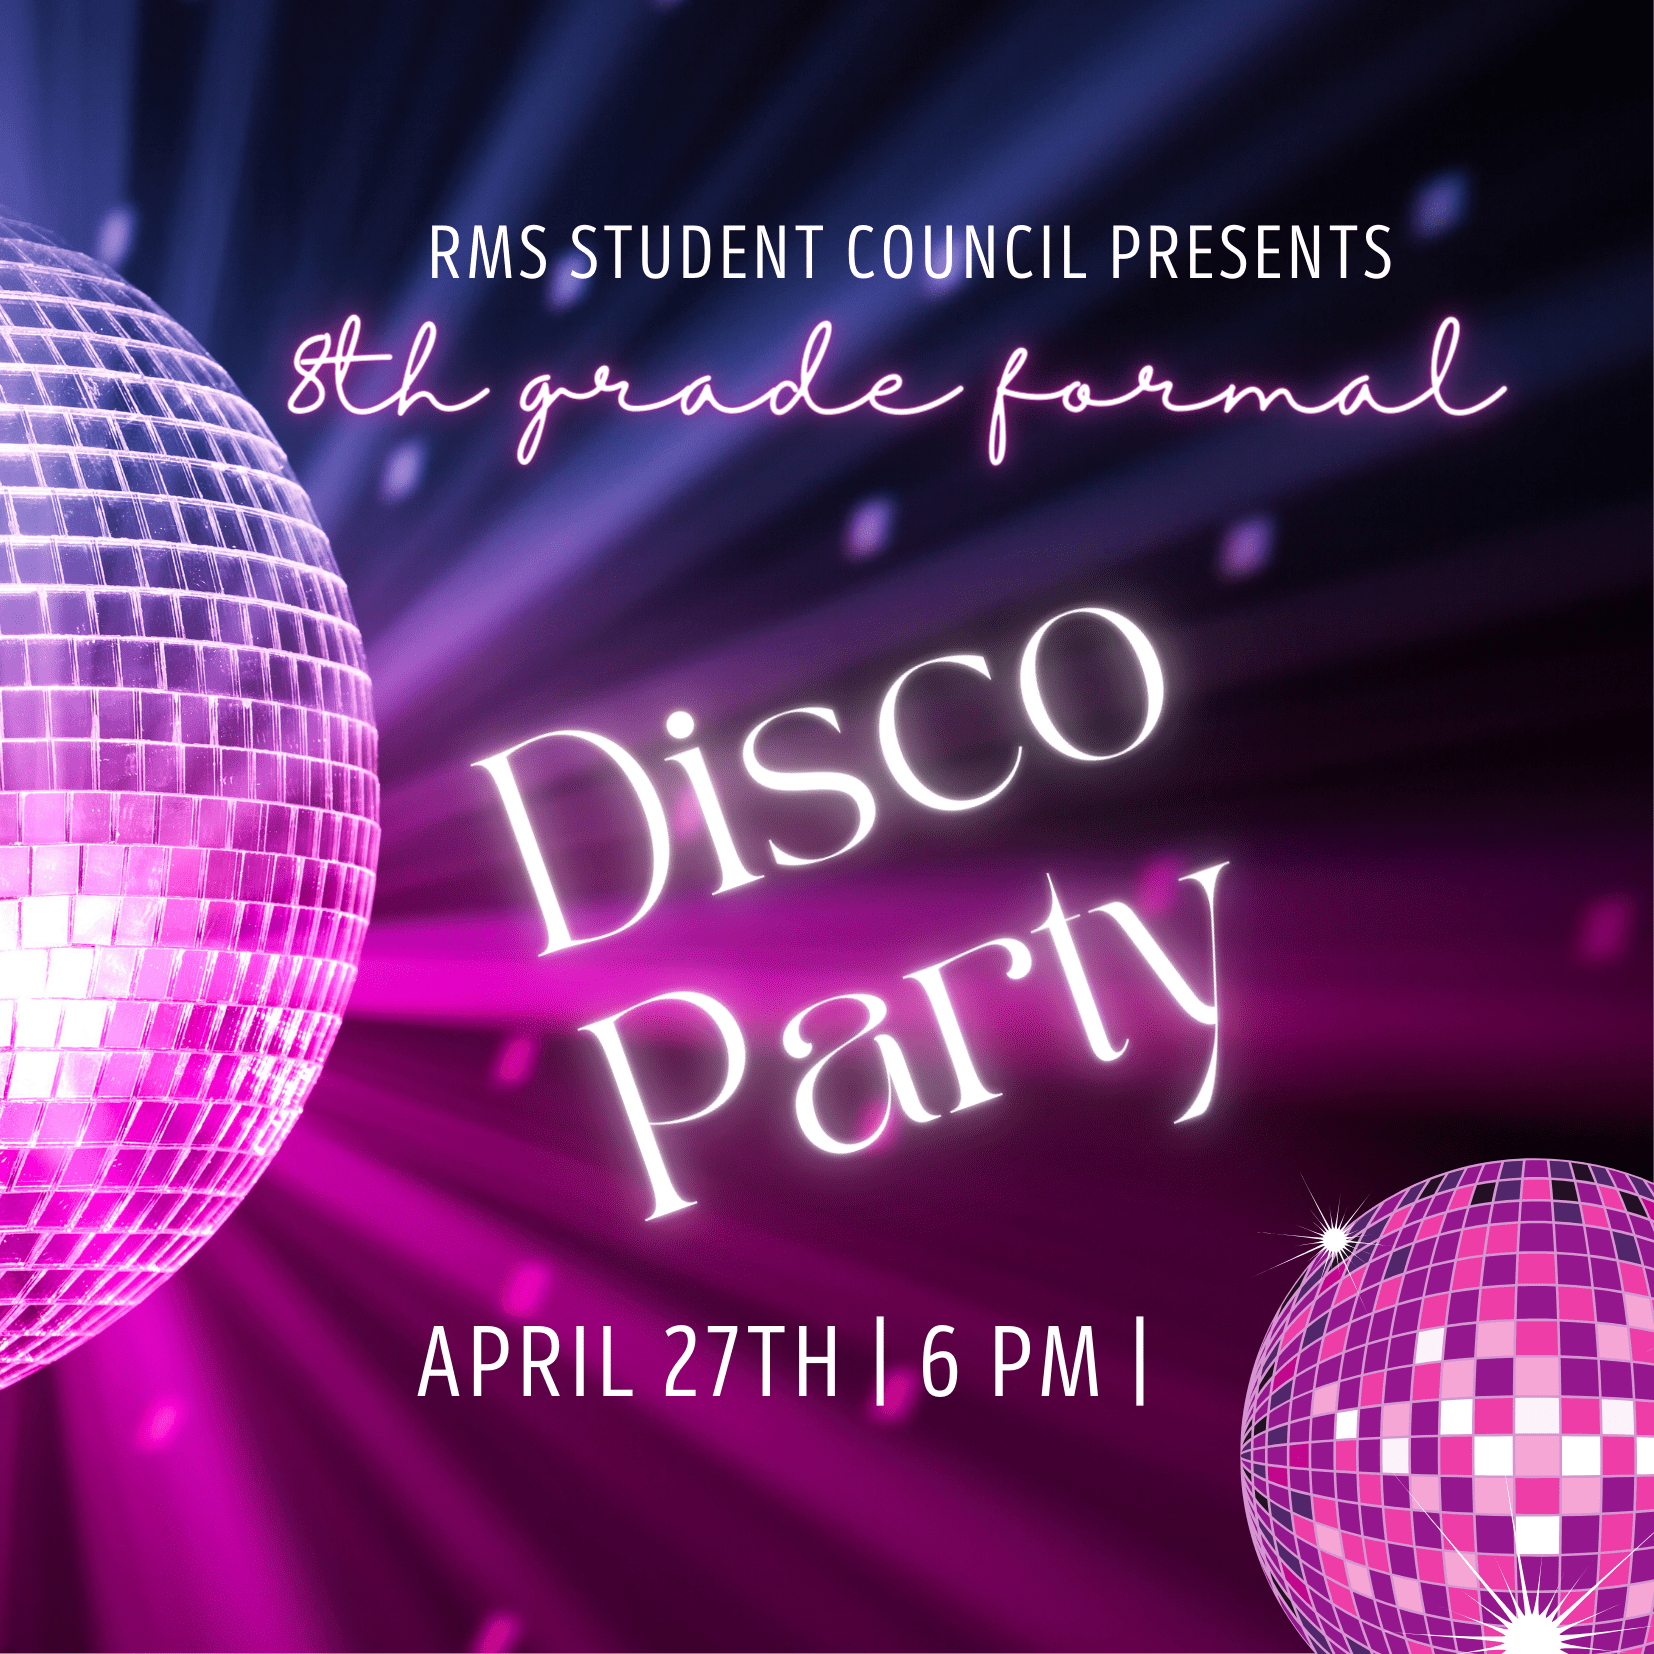 8th Grade Formal is April 26th - Disco Party